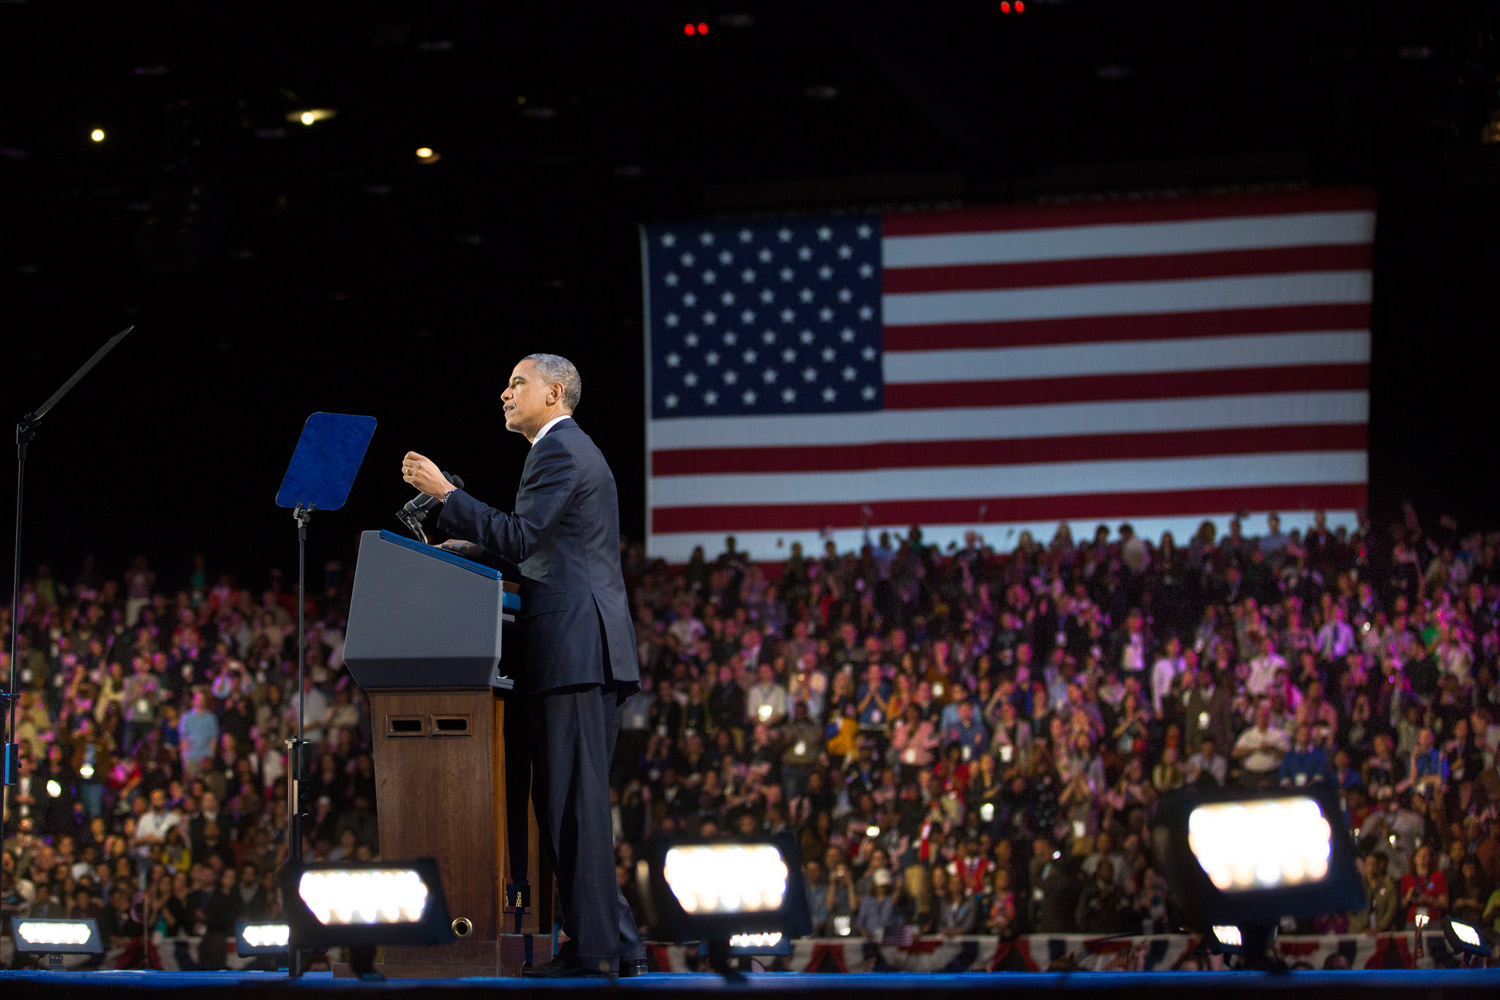 Nov. 6, 2012. President Barack Obama speaks to his supporters at his election night victory party in Chicago.